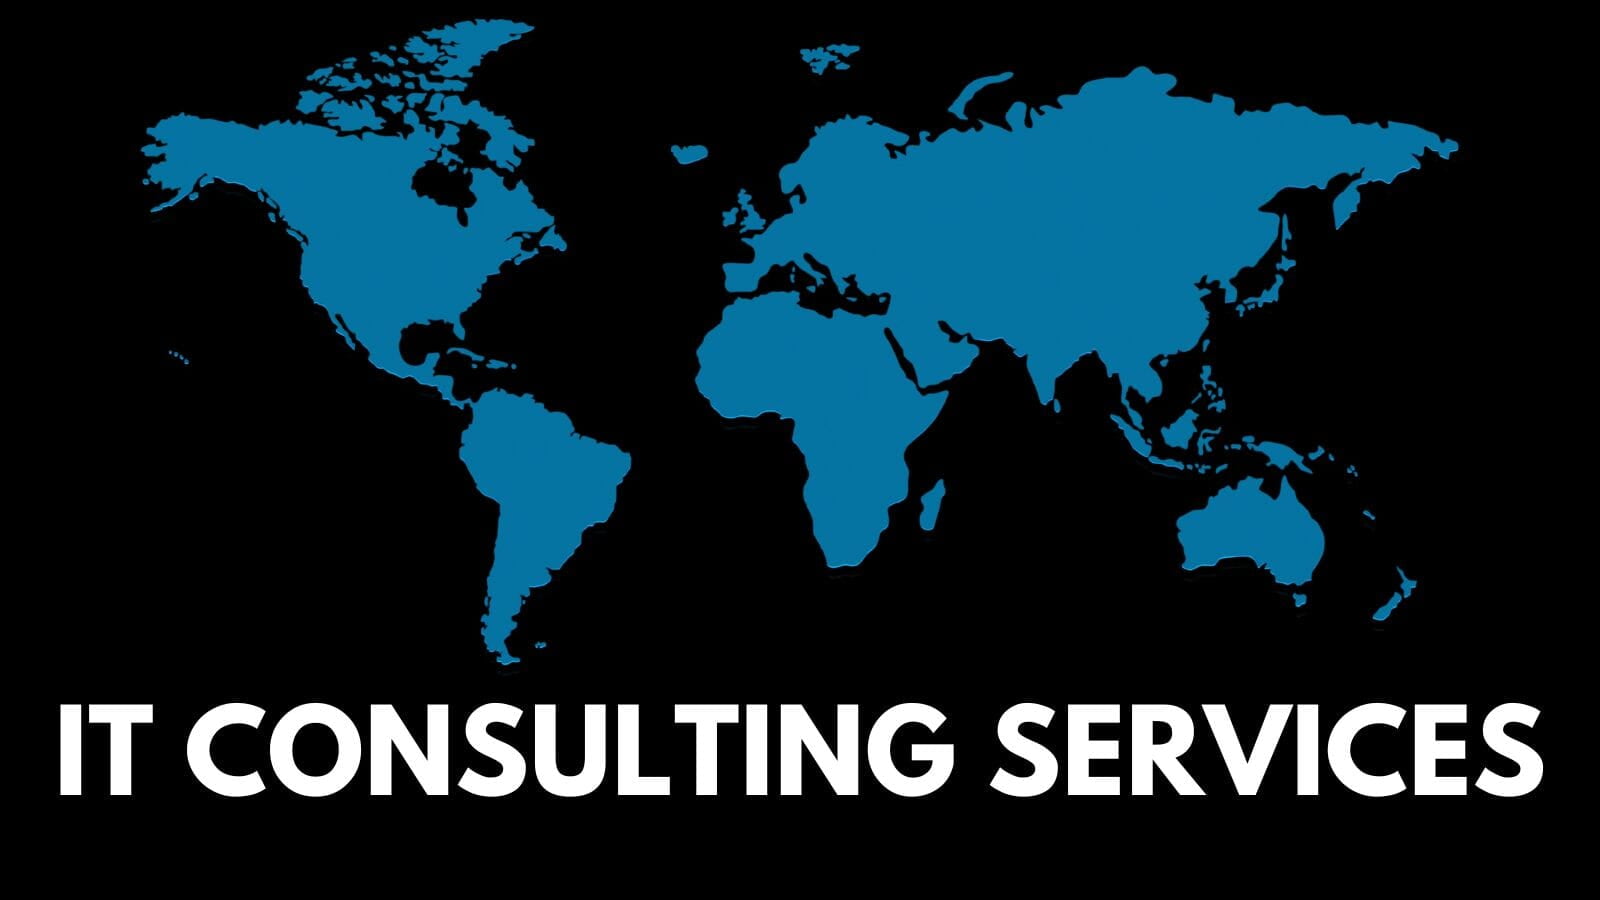 Do You Really Need IT Consulting Services? Here's What You Need to Know